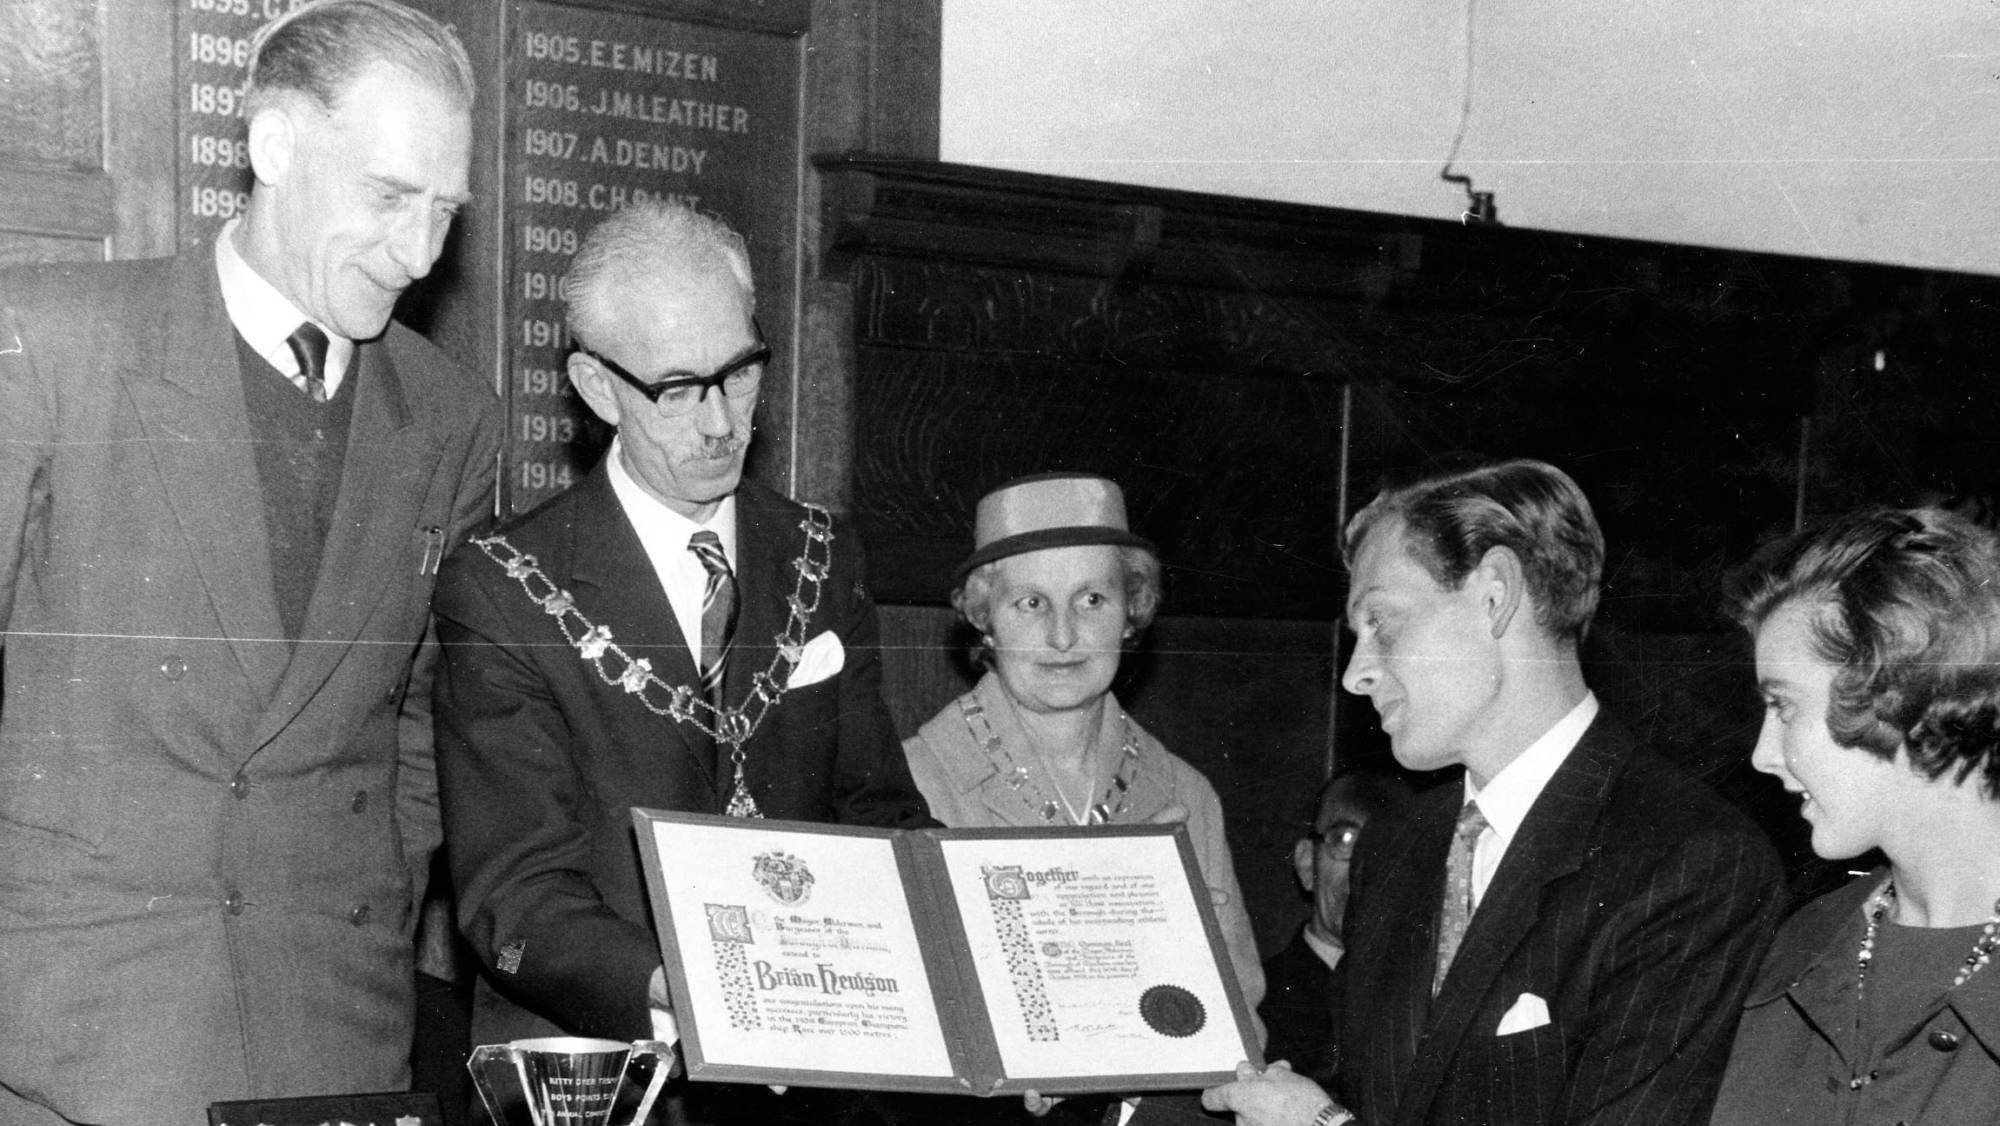 The achievements of Brian Hewson were recognised by Merton Council in London, where he was born and raised ©Merton Council 